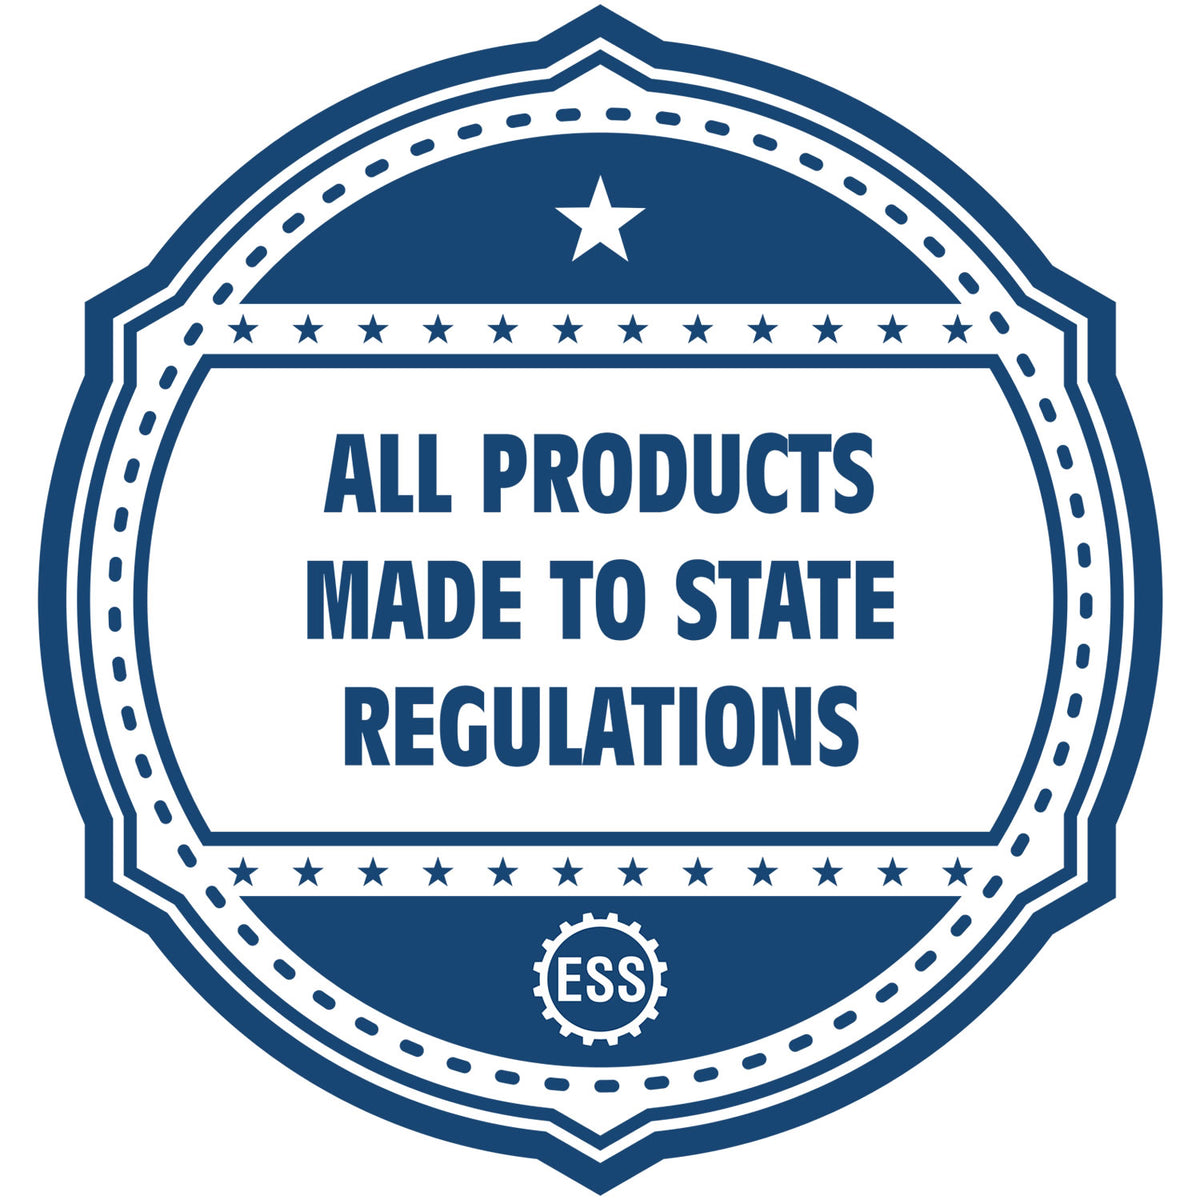 An icon or badge element for the Long Reach Minnesota Land Surveyor Seal showing that this product is made in compliance with state regulations.